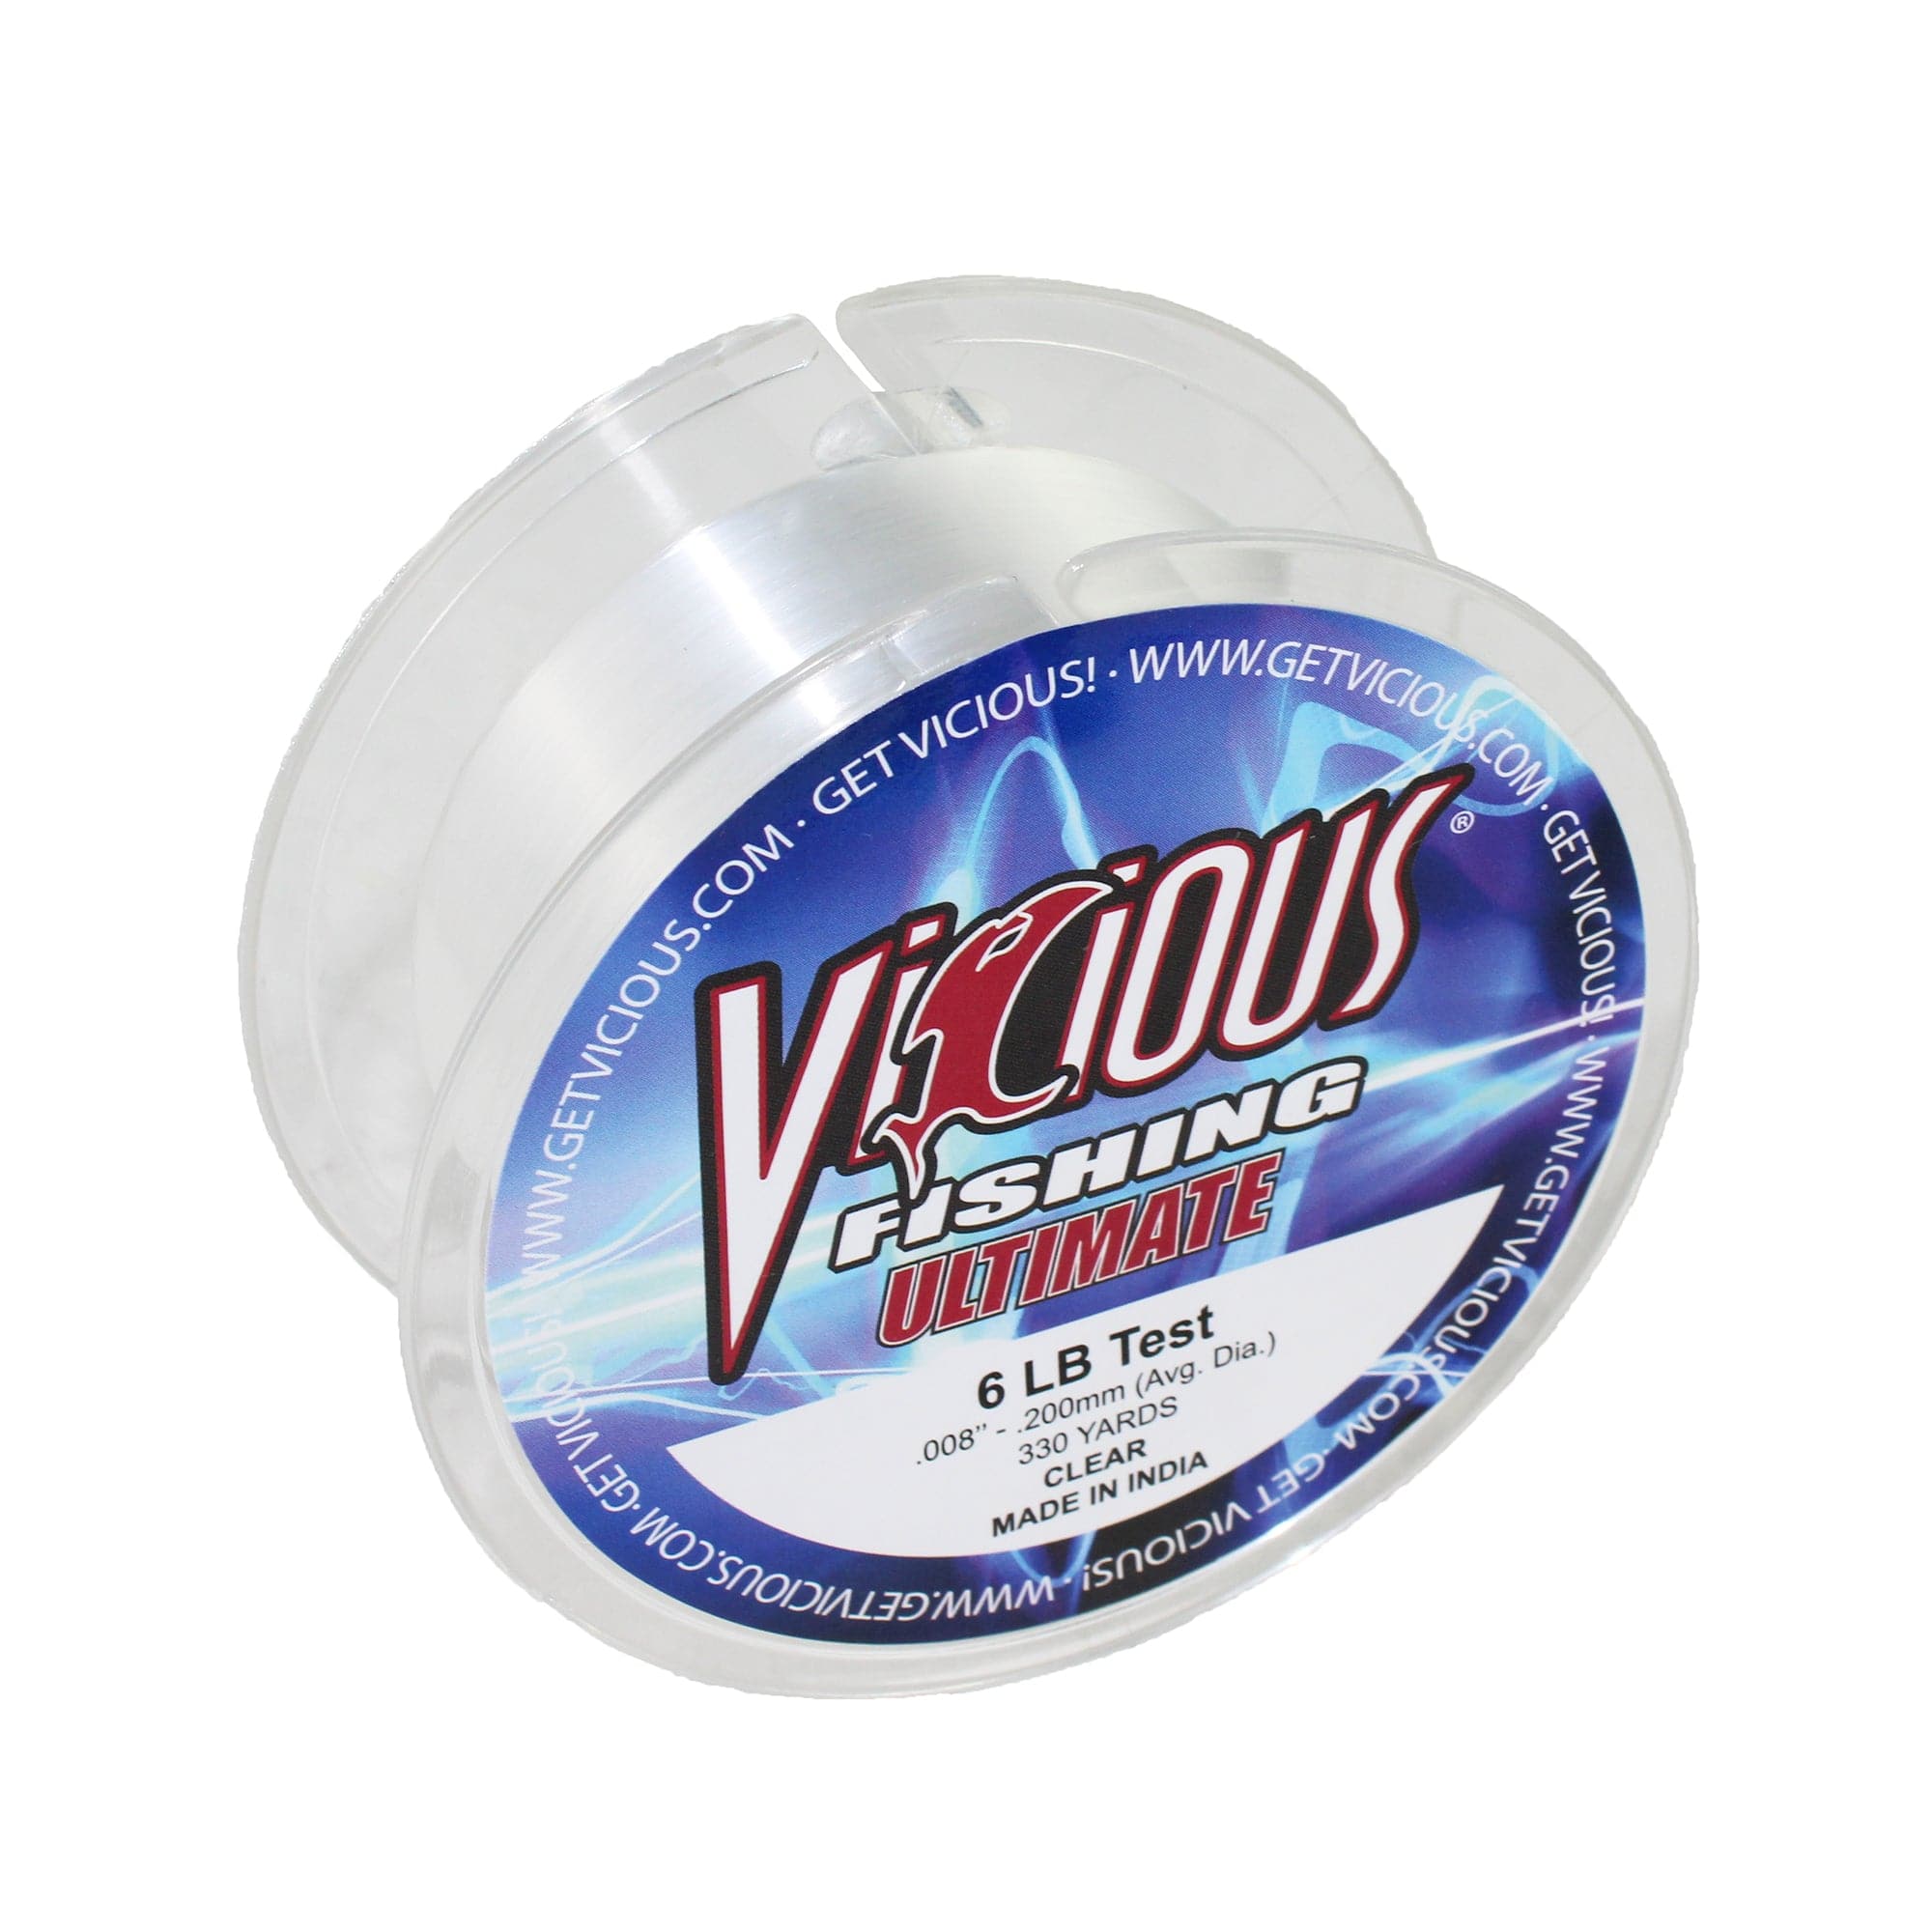 Vicious Fishing VCL Ultimate Monofilament Clear Fishing Line - 330 Yards